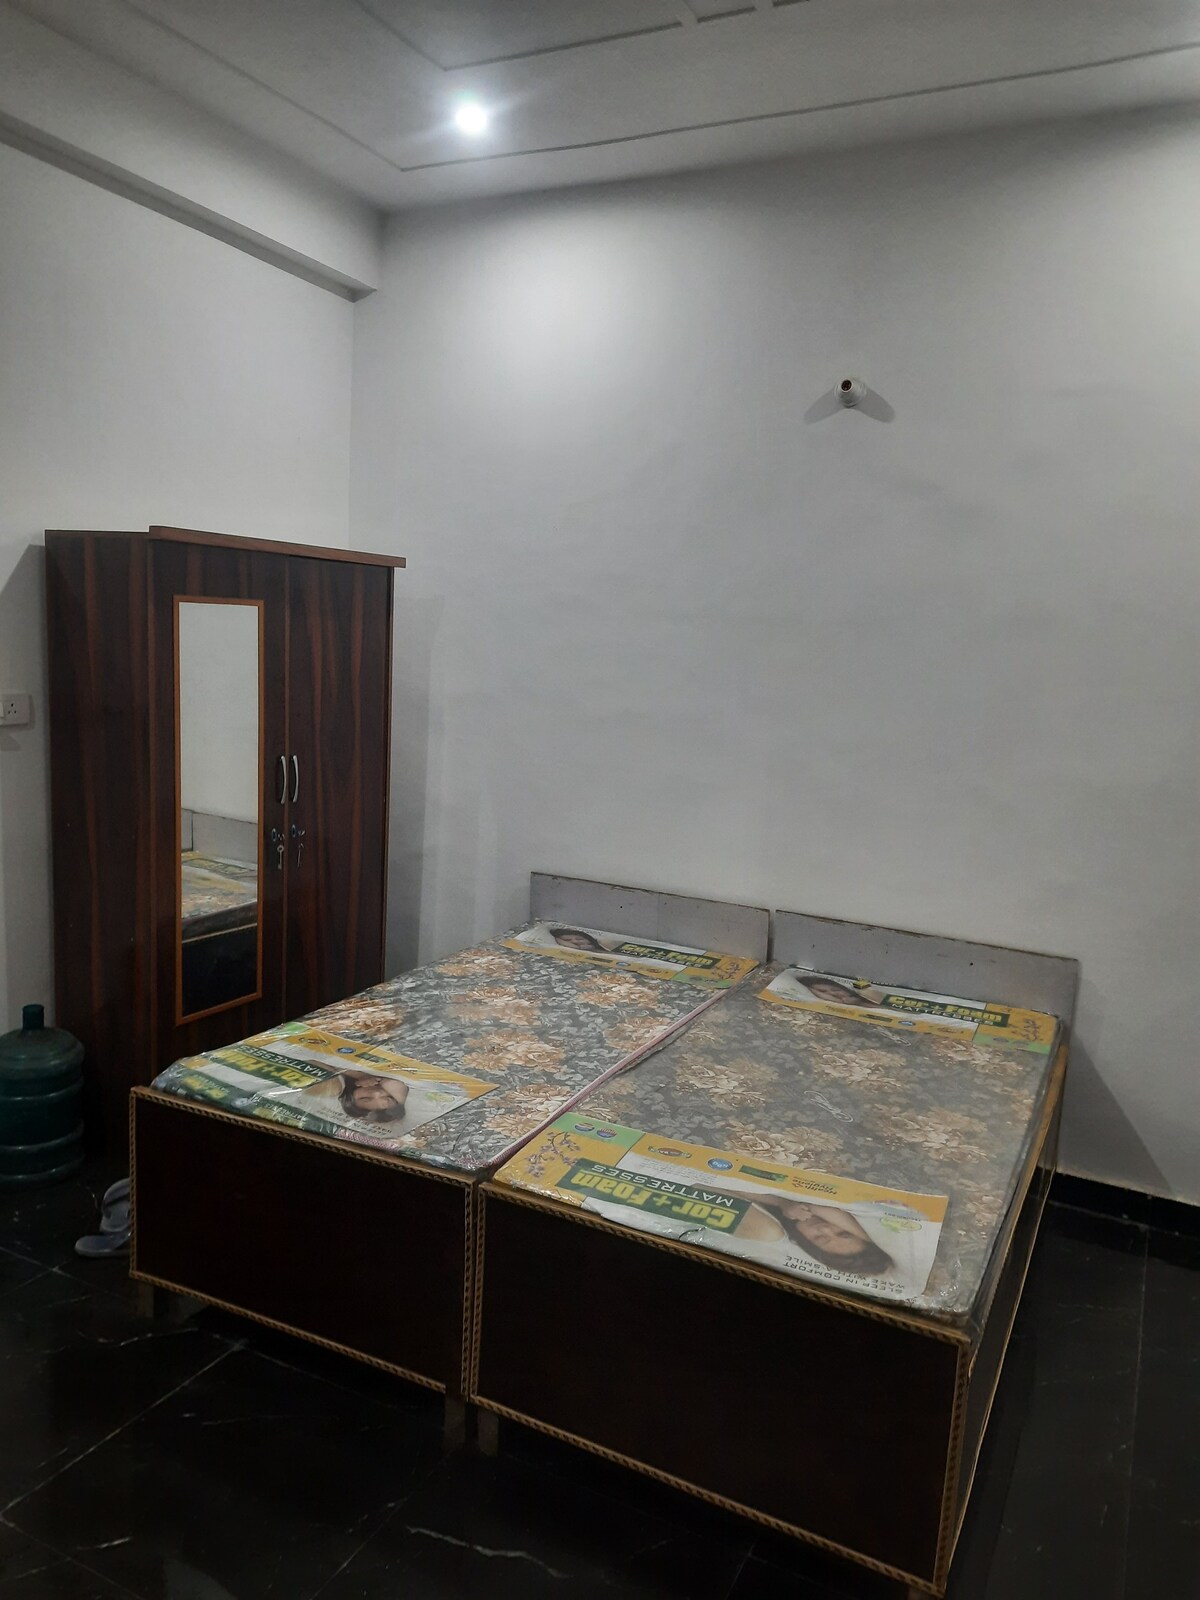 Guest house available noida 63A